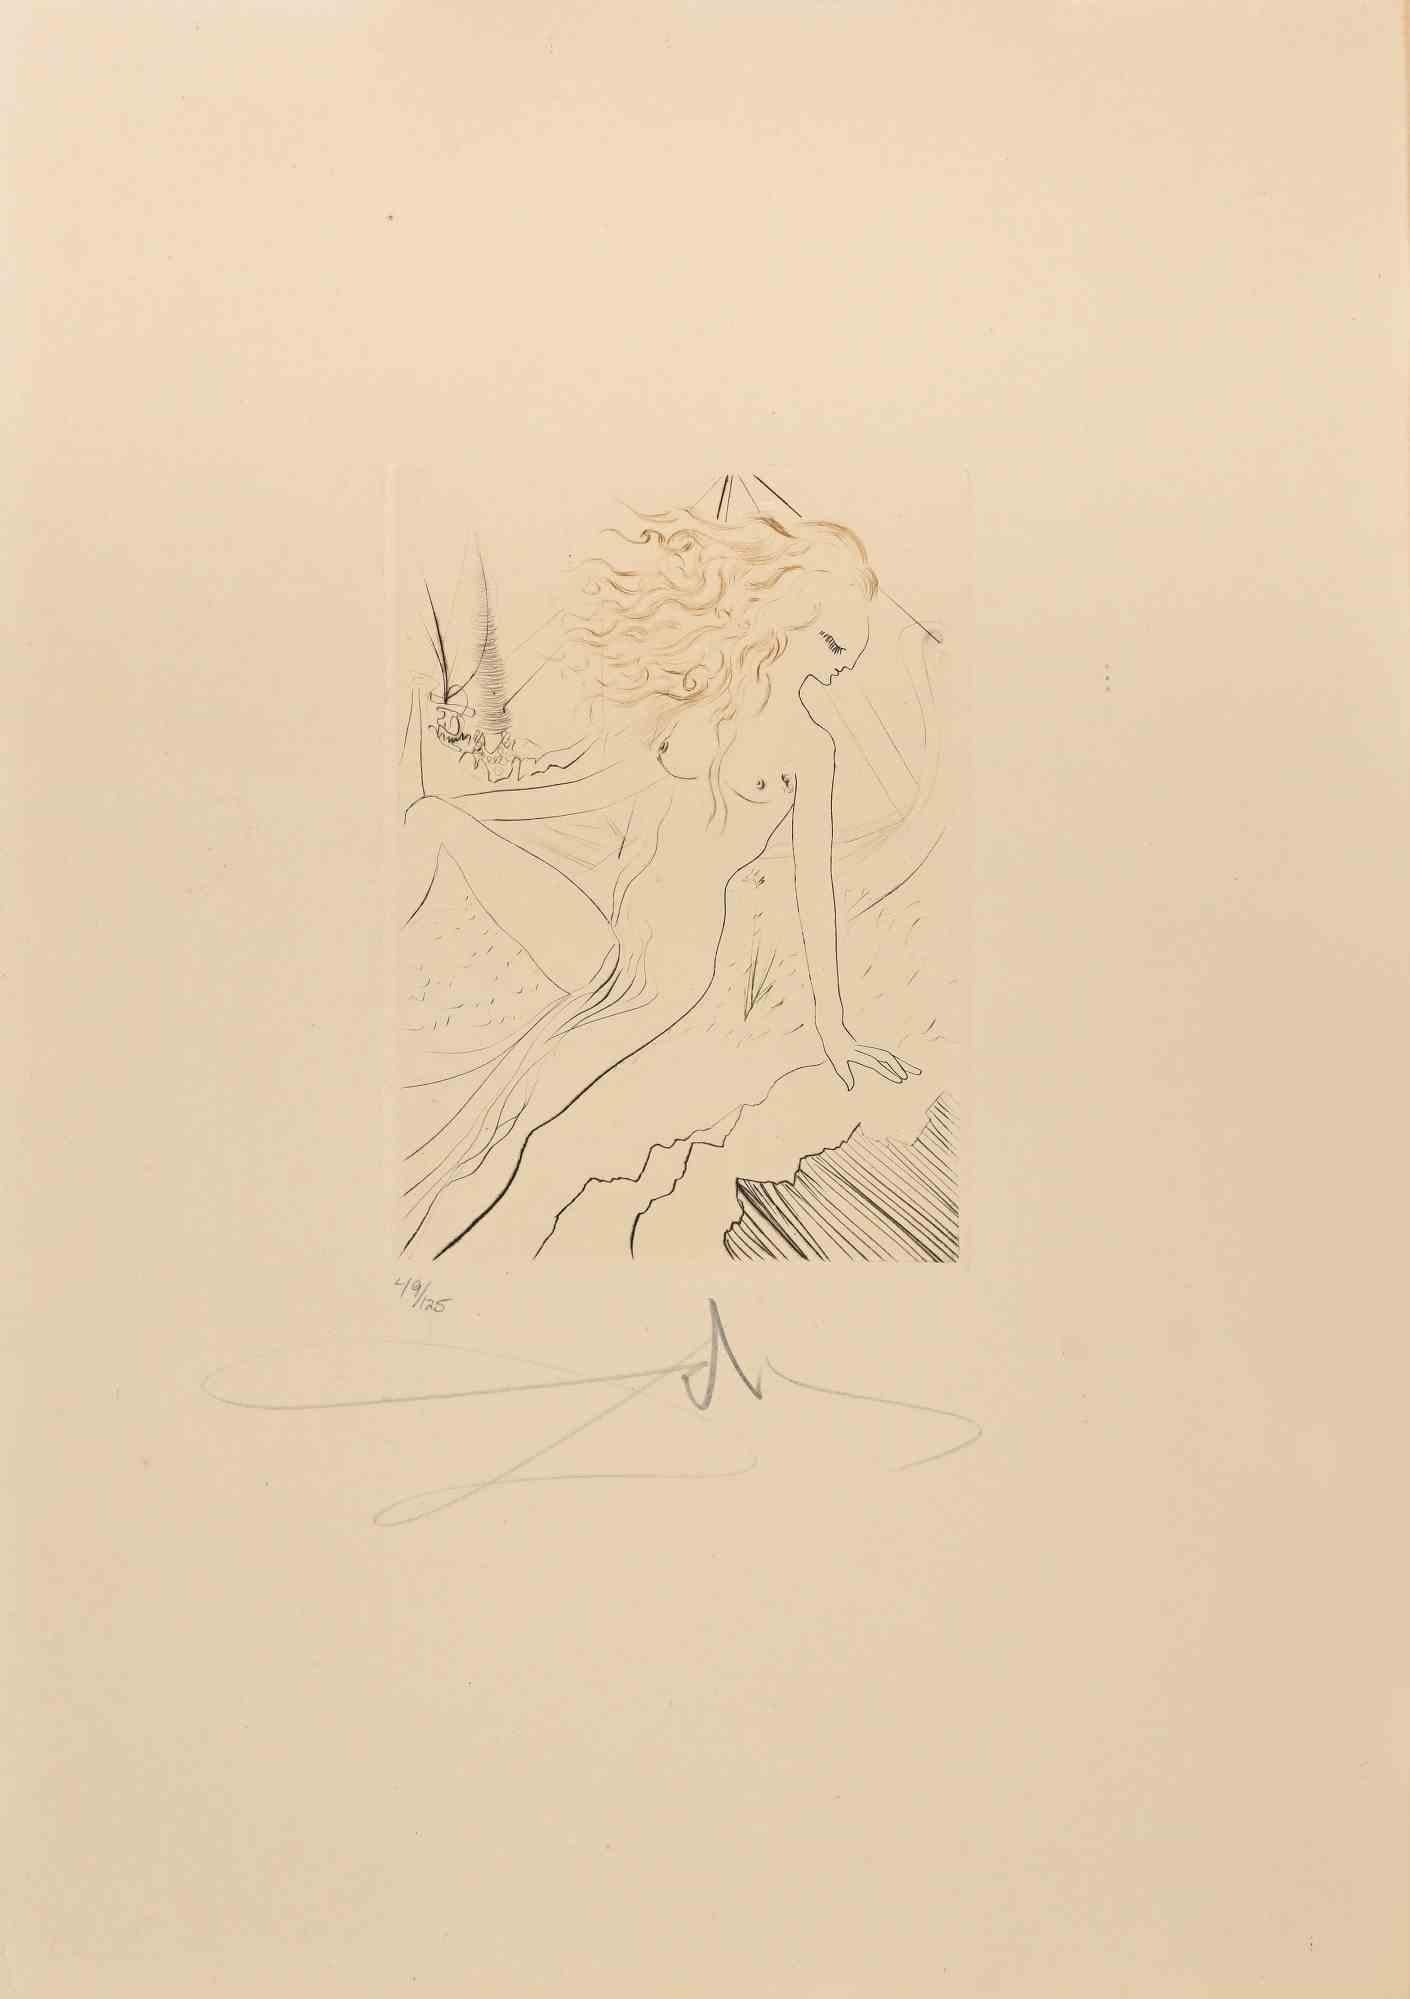 Salvador Dalí Print - The Betrothed of the King  - Etching and drypoint - 1972